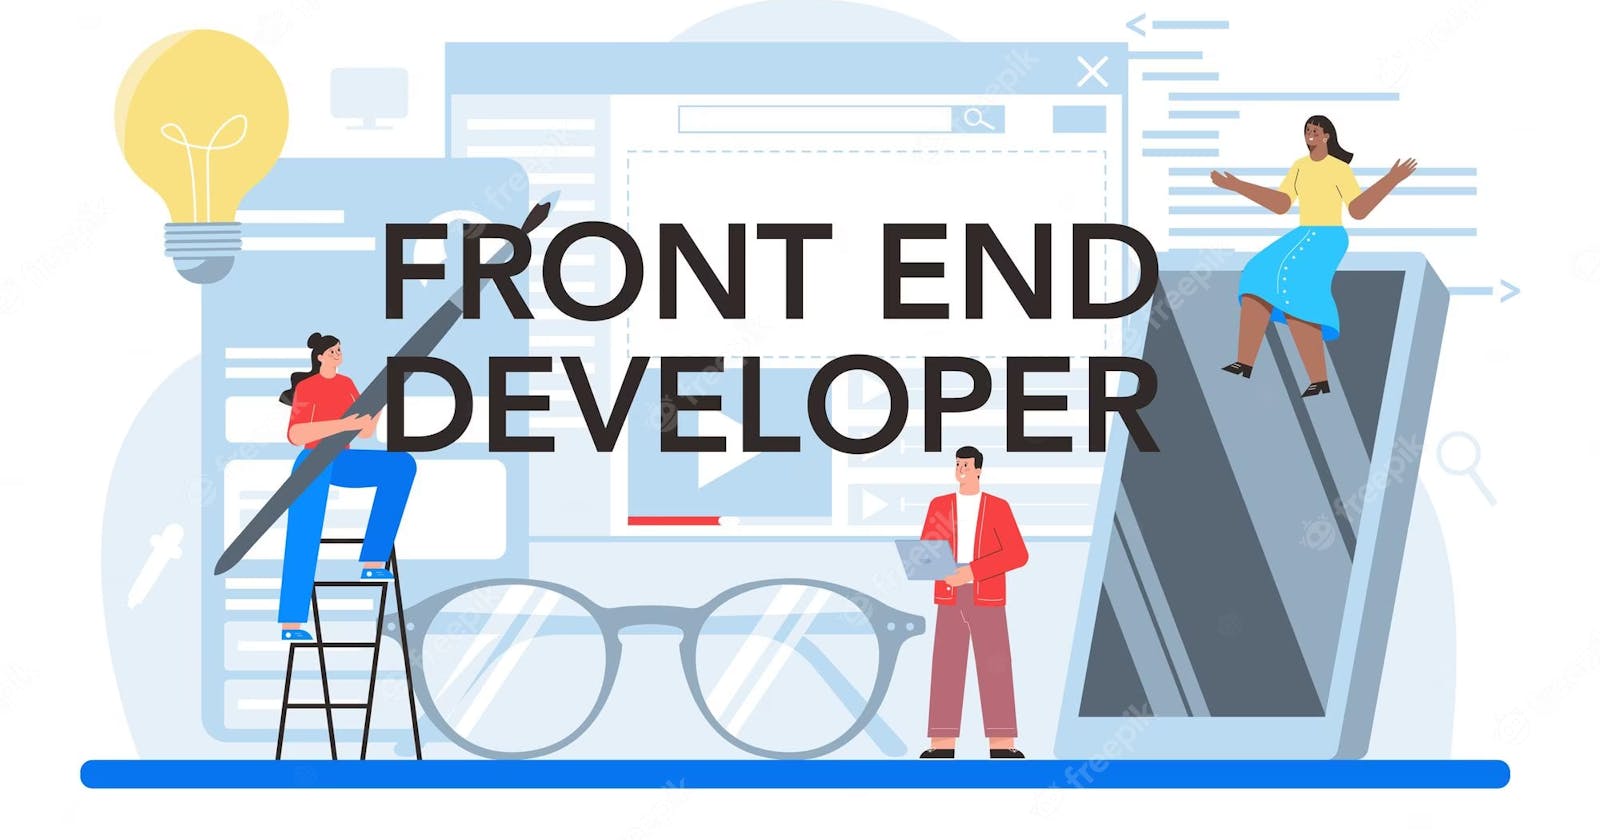 "Getting Started with Front-End Development : A Beginner's Guide"